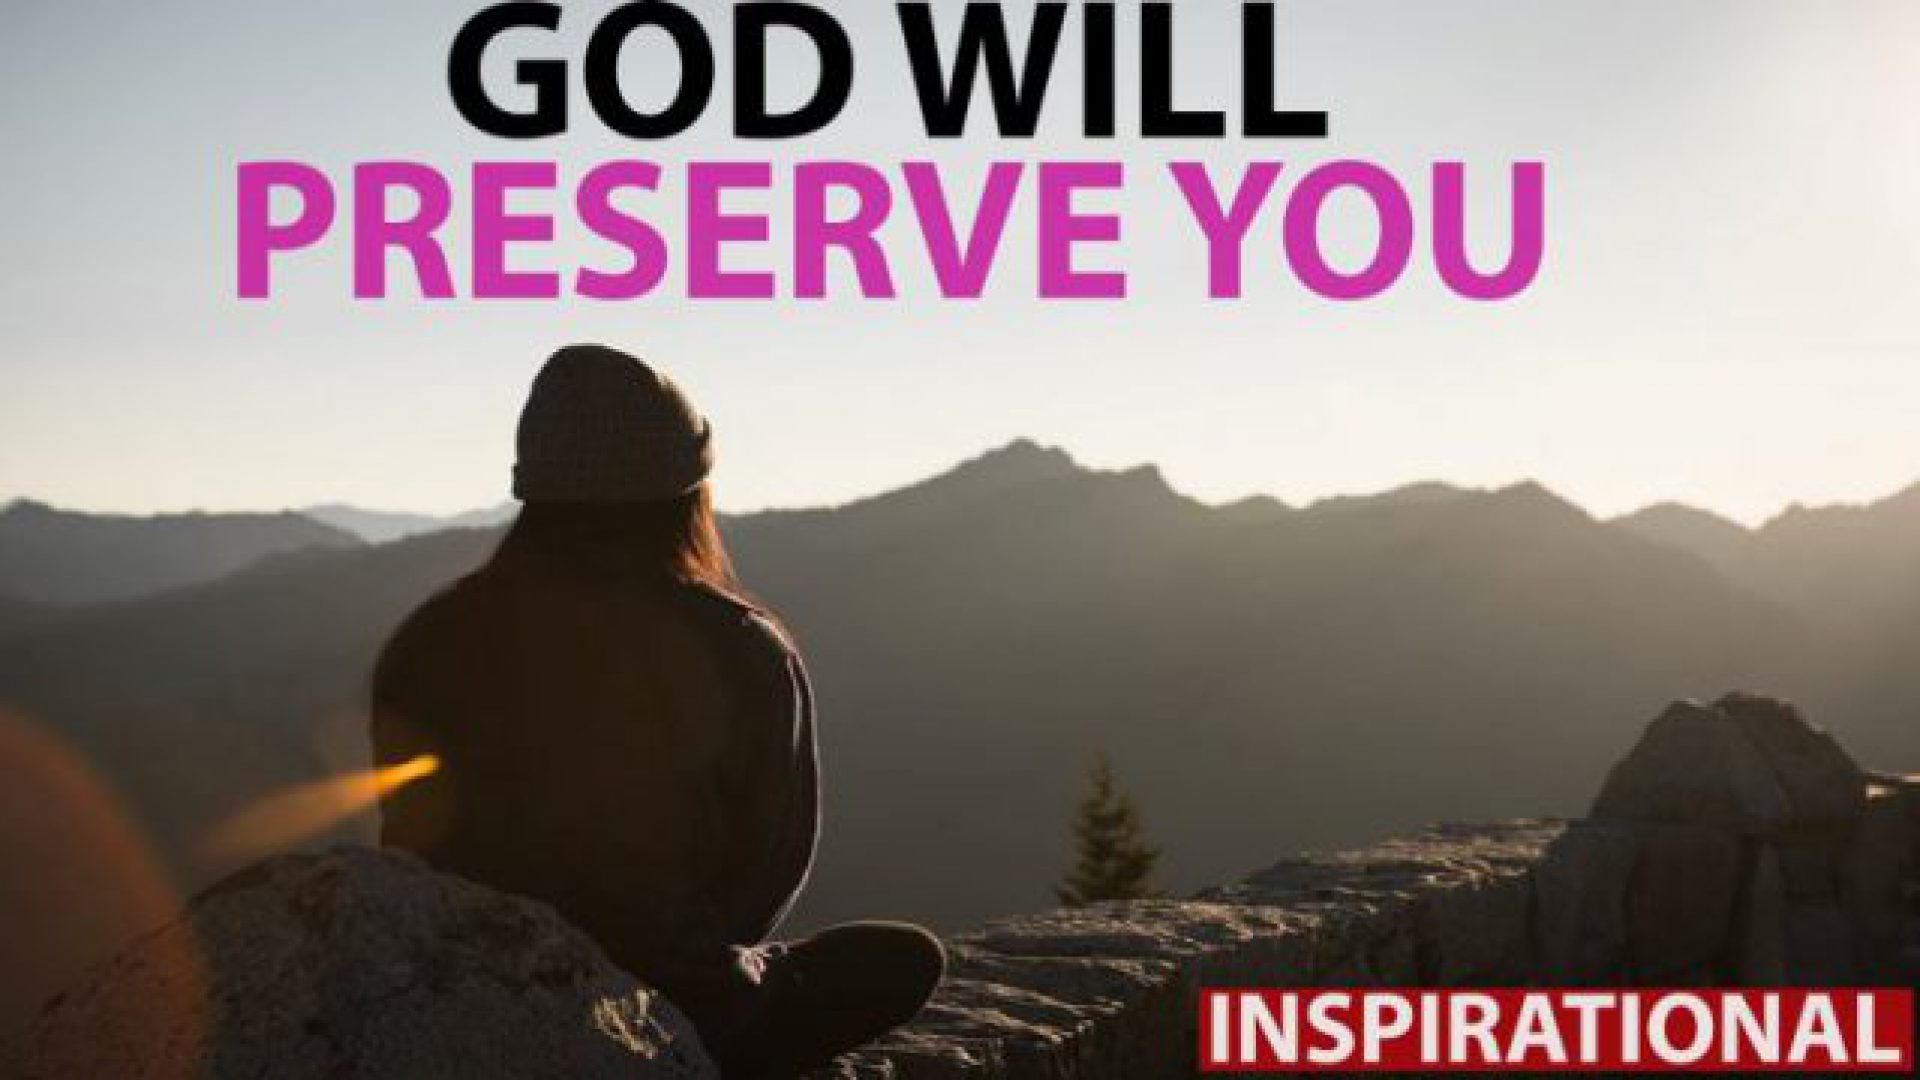 GOD WILL PRESERVE YOU